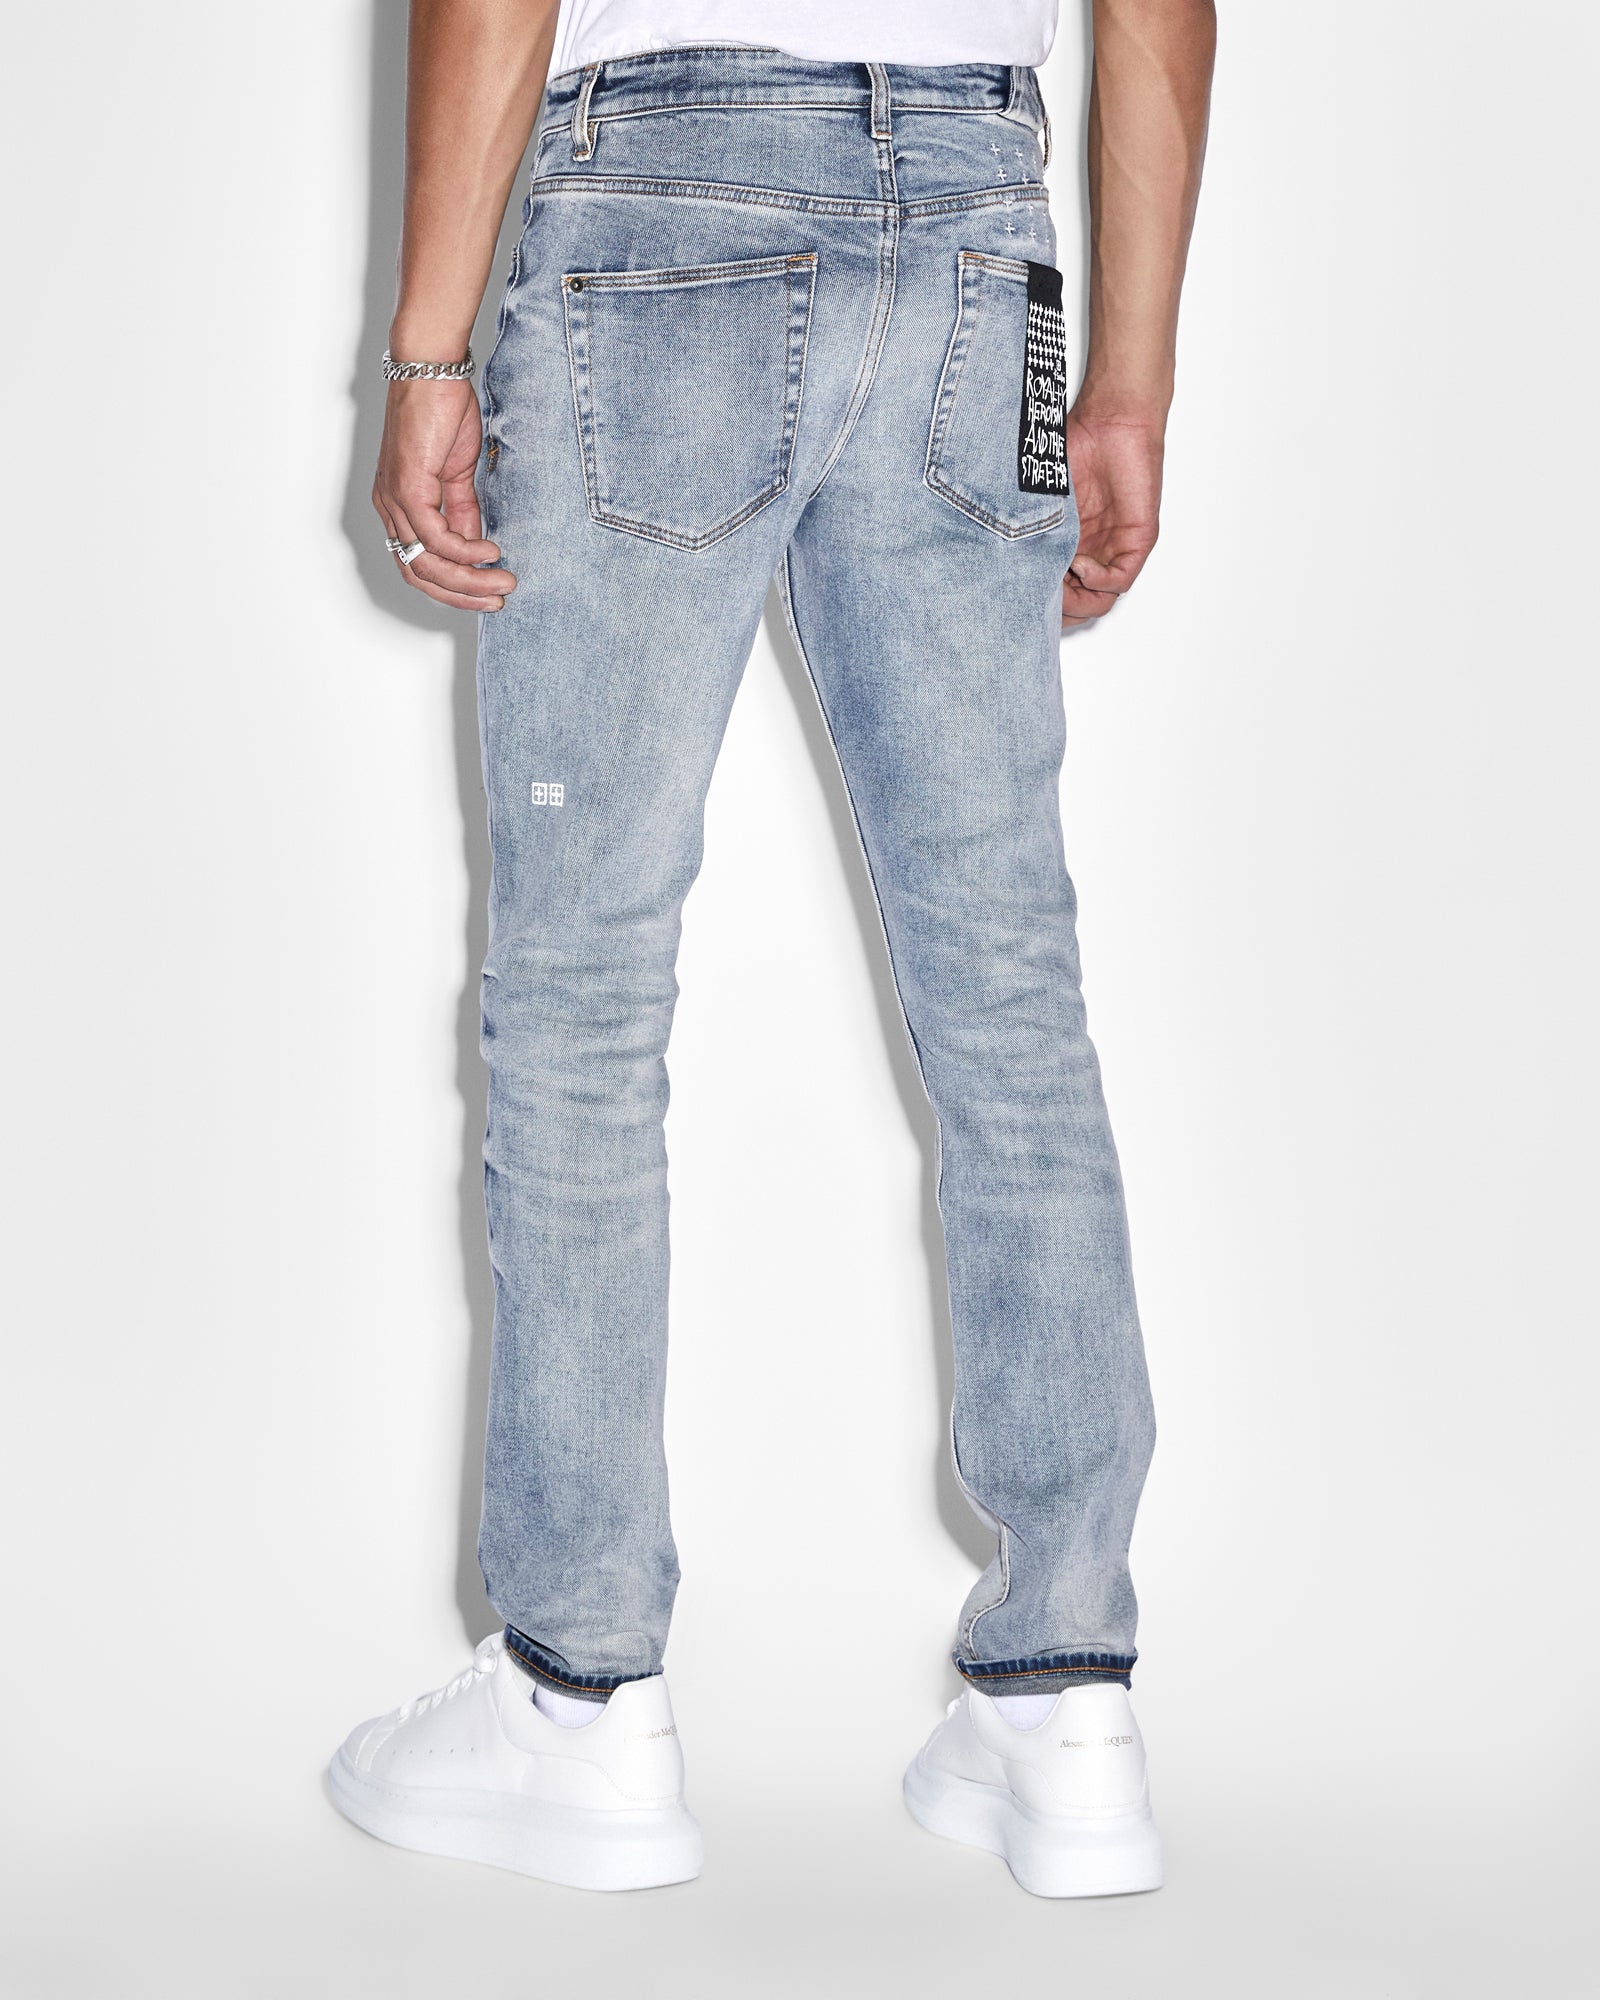 Buy Chitch Pure Dynamite | Men's Tapered Jeans | Ksubi